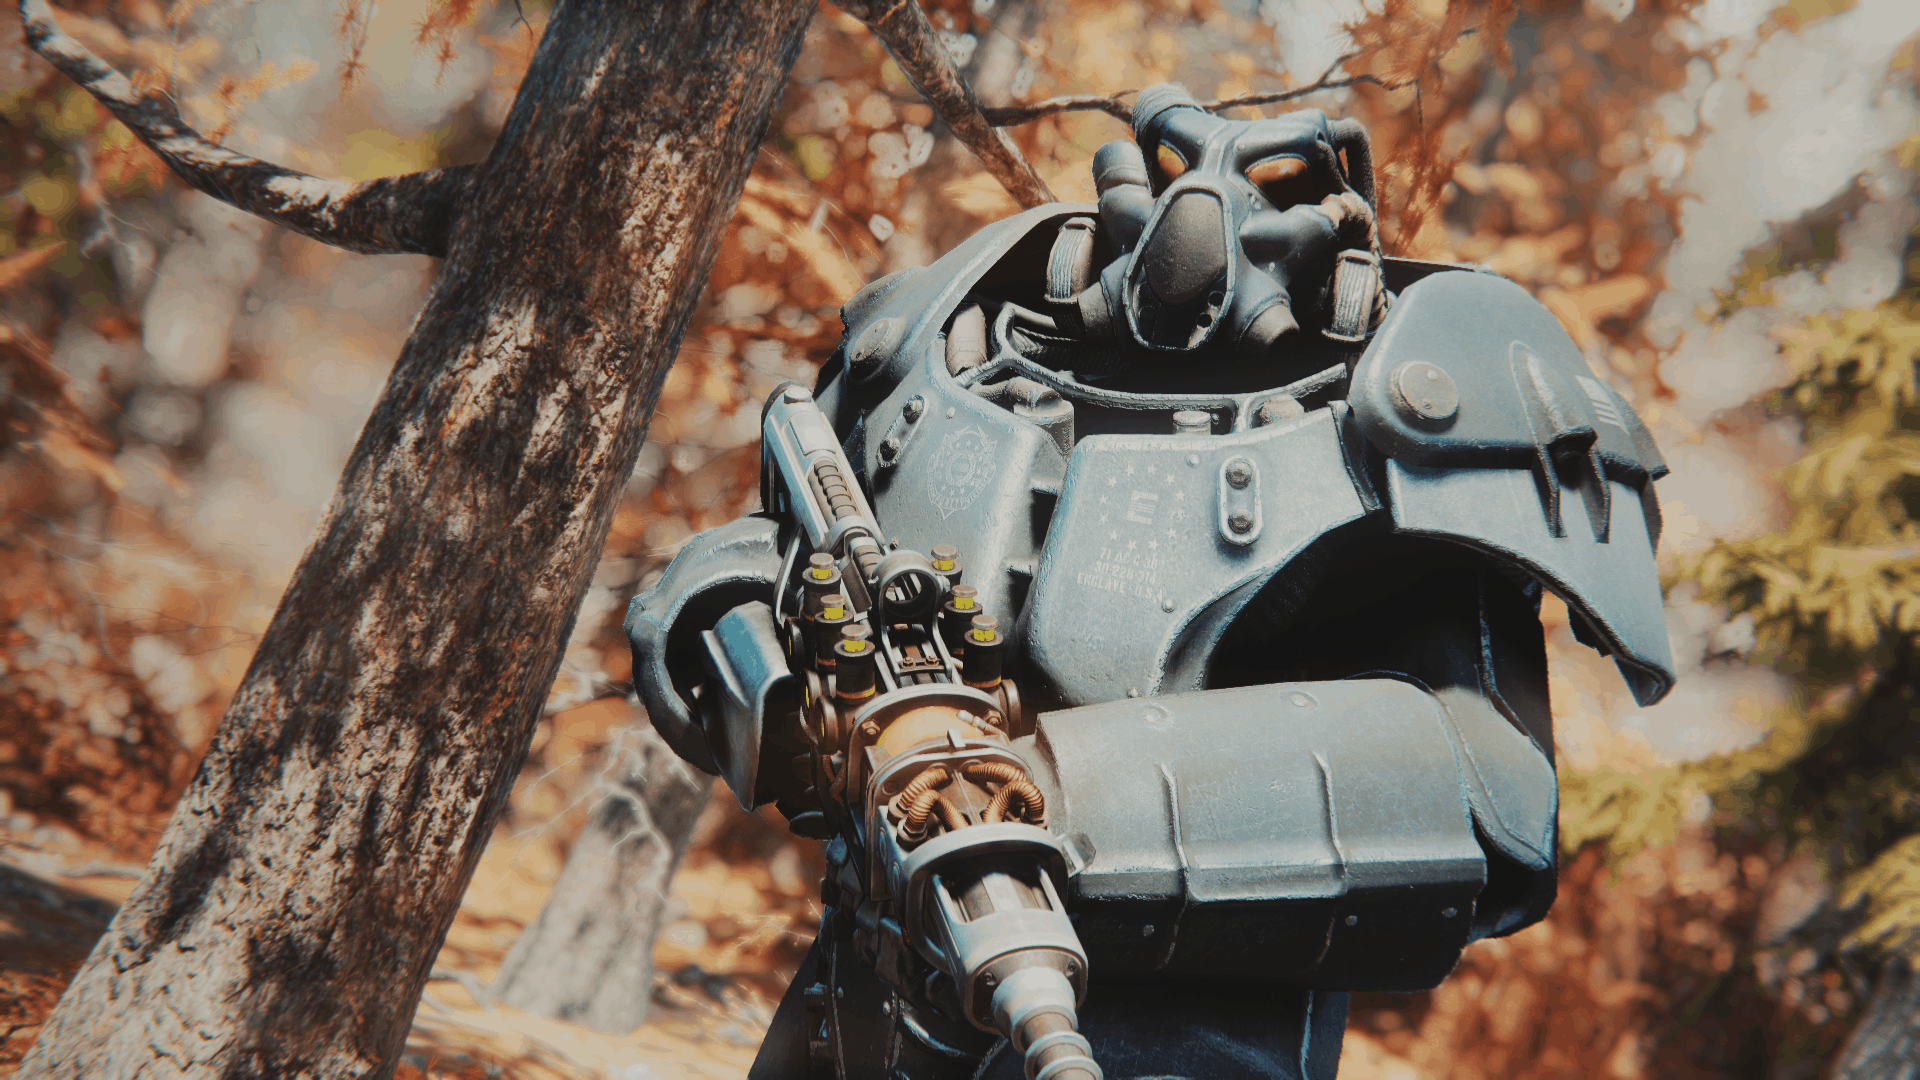 Enclave Trooper and Sigma PA textures (4K) Fallout 76 Mod download. 